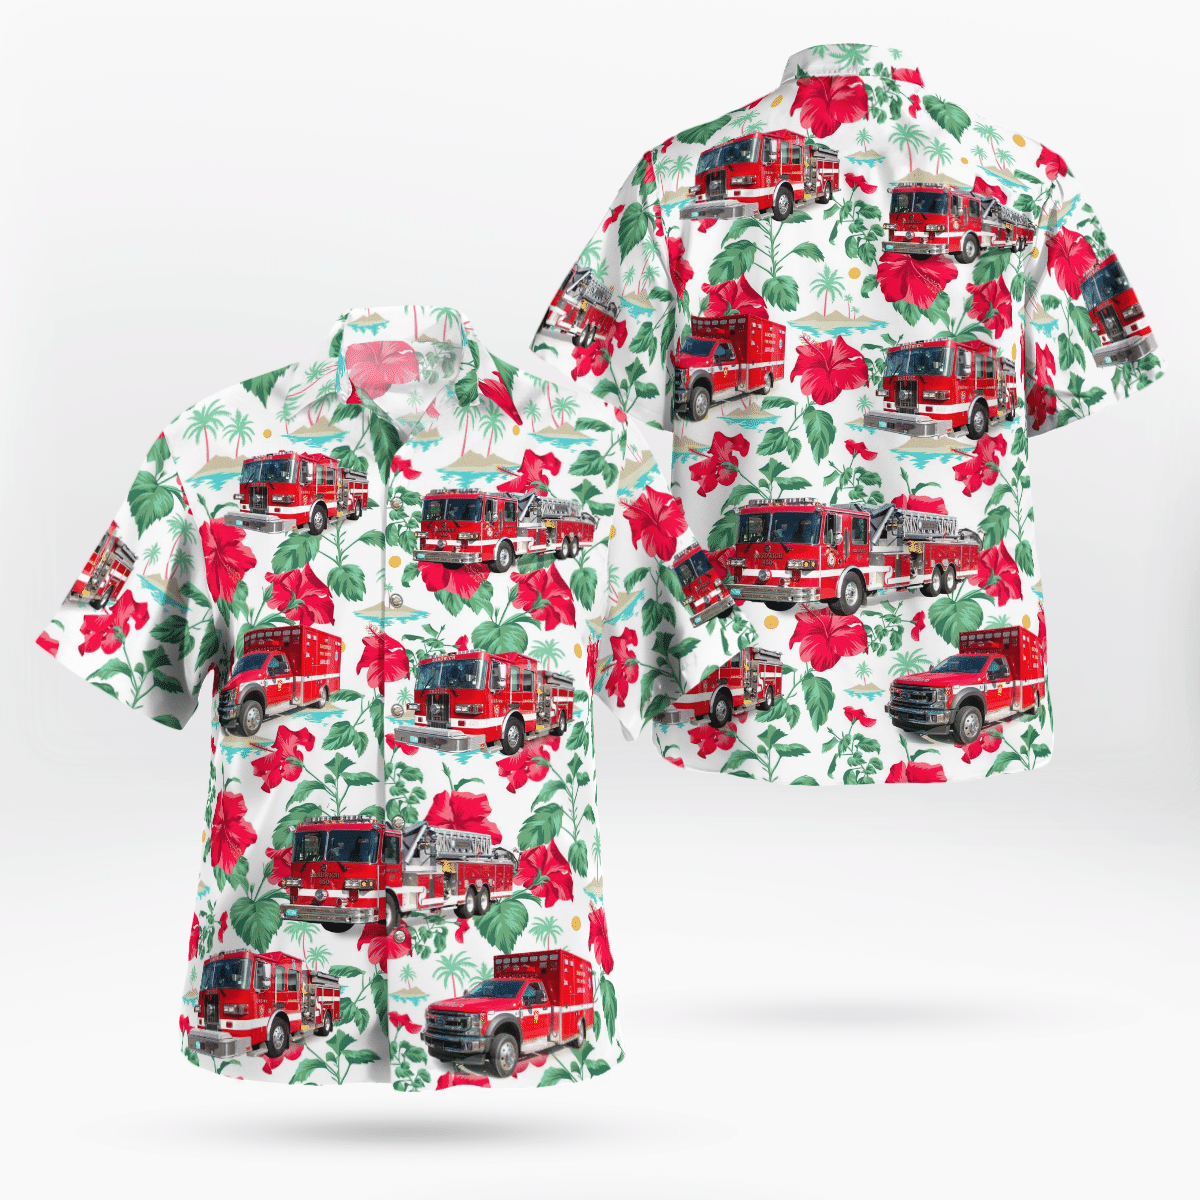 If you are in need of a new summertime look, pick up this Hawaiian shirt 41